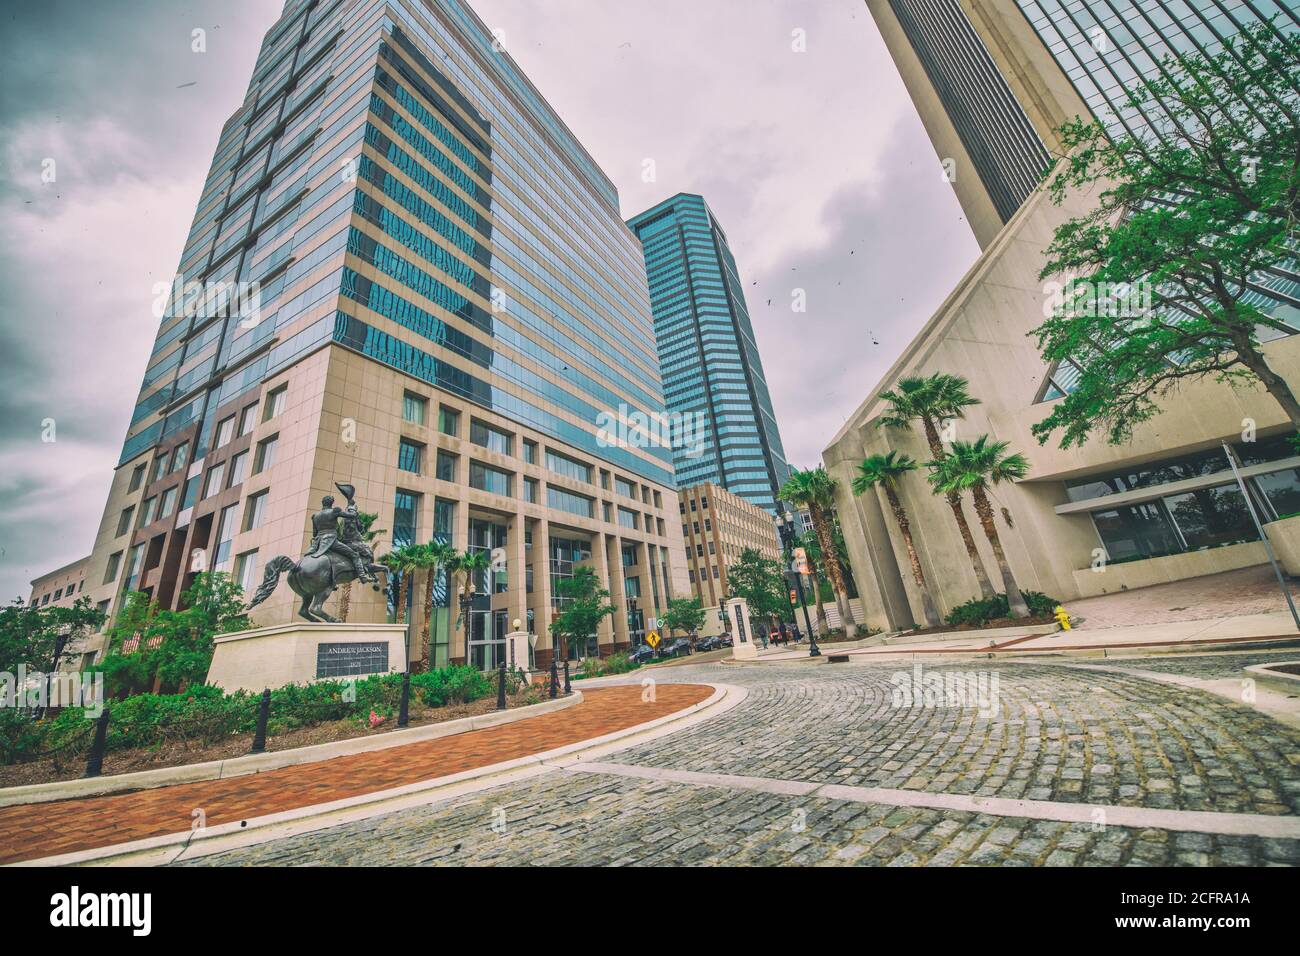 JACKSONVILLE, FL - APRIL 8, 2018: City skyscrapers from independent Drive on a cloudy day. Stock Photo